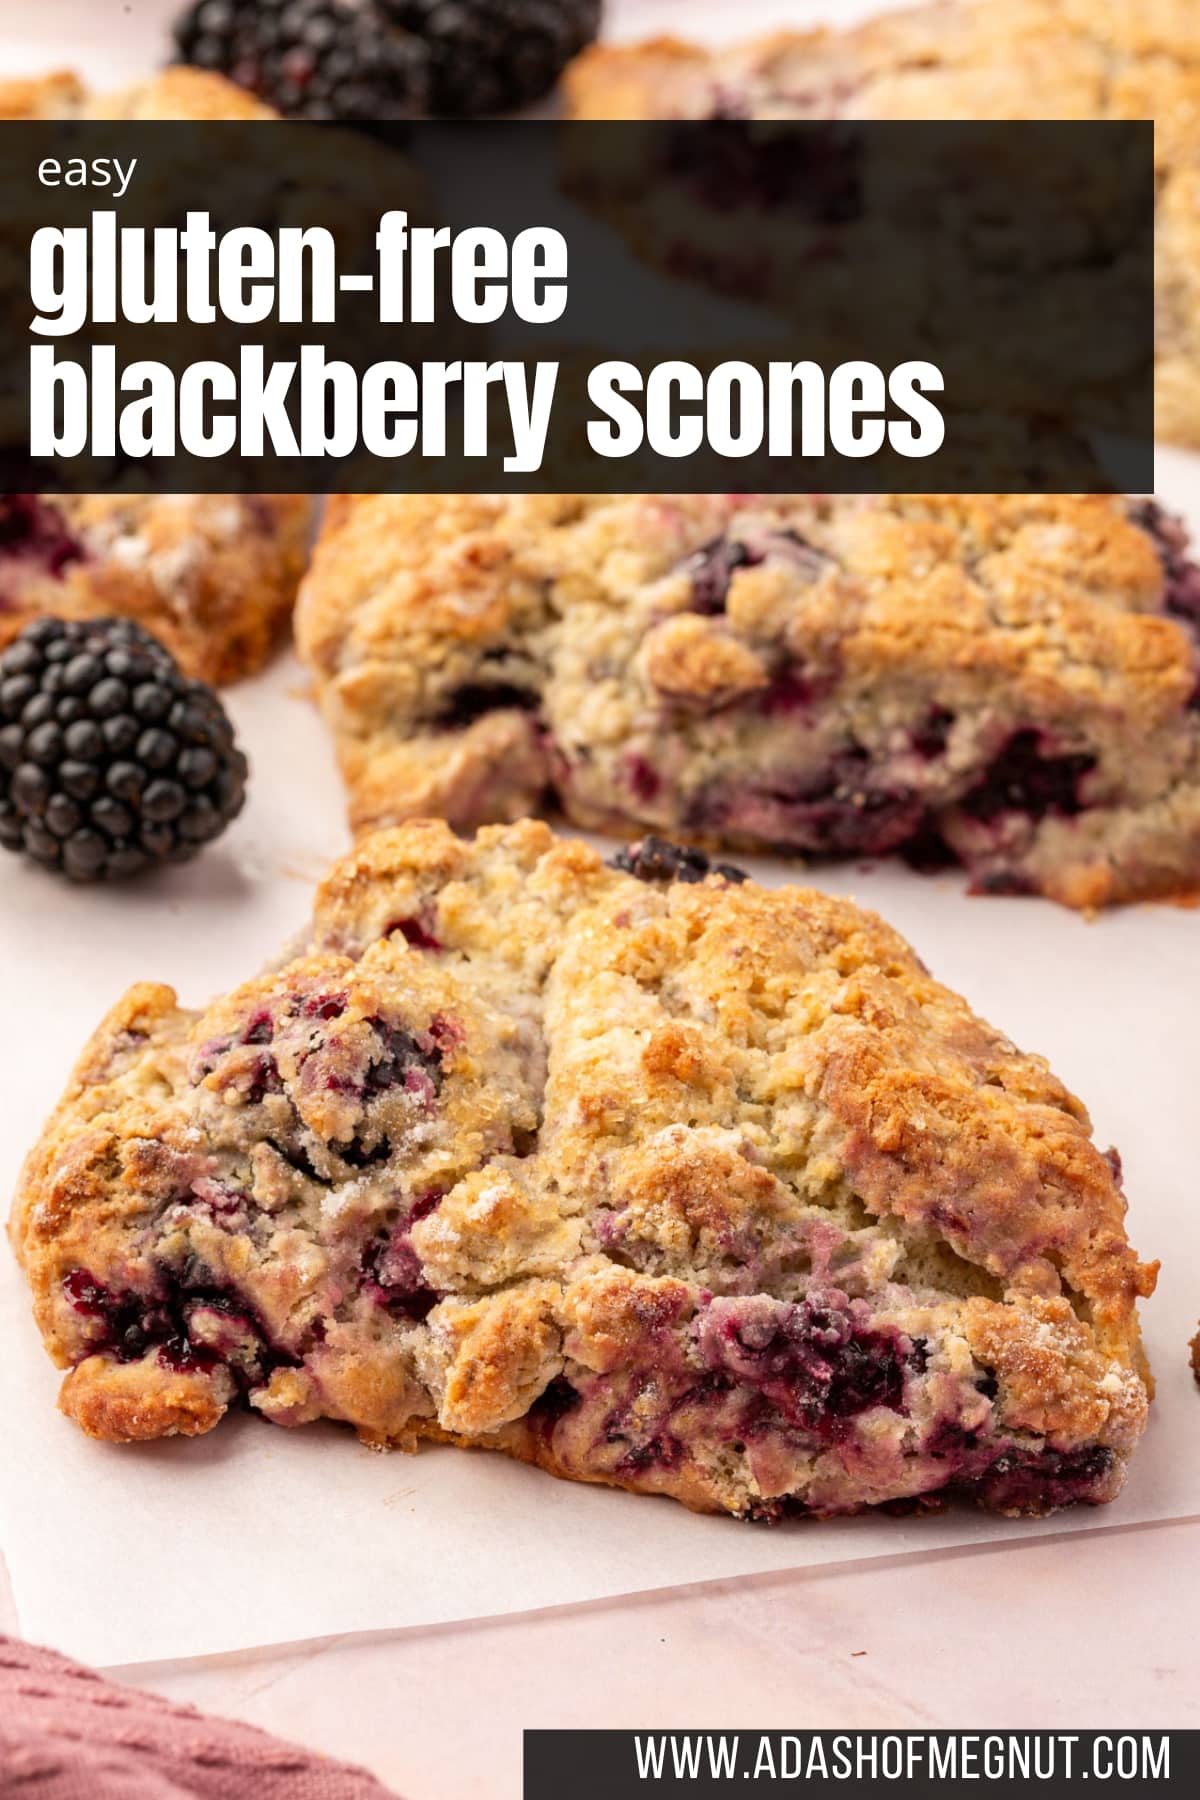 A close up of a gluten-free blackberry scone on a piece of parchment paper with more scones and fresh blackberries in the background.